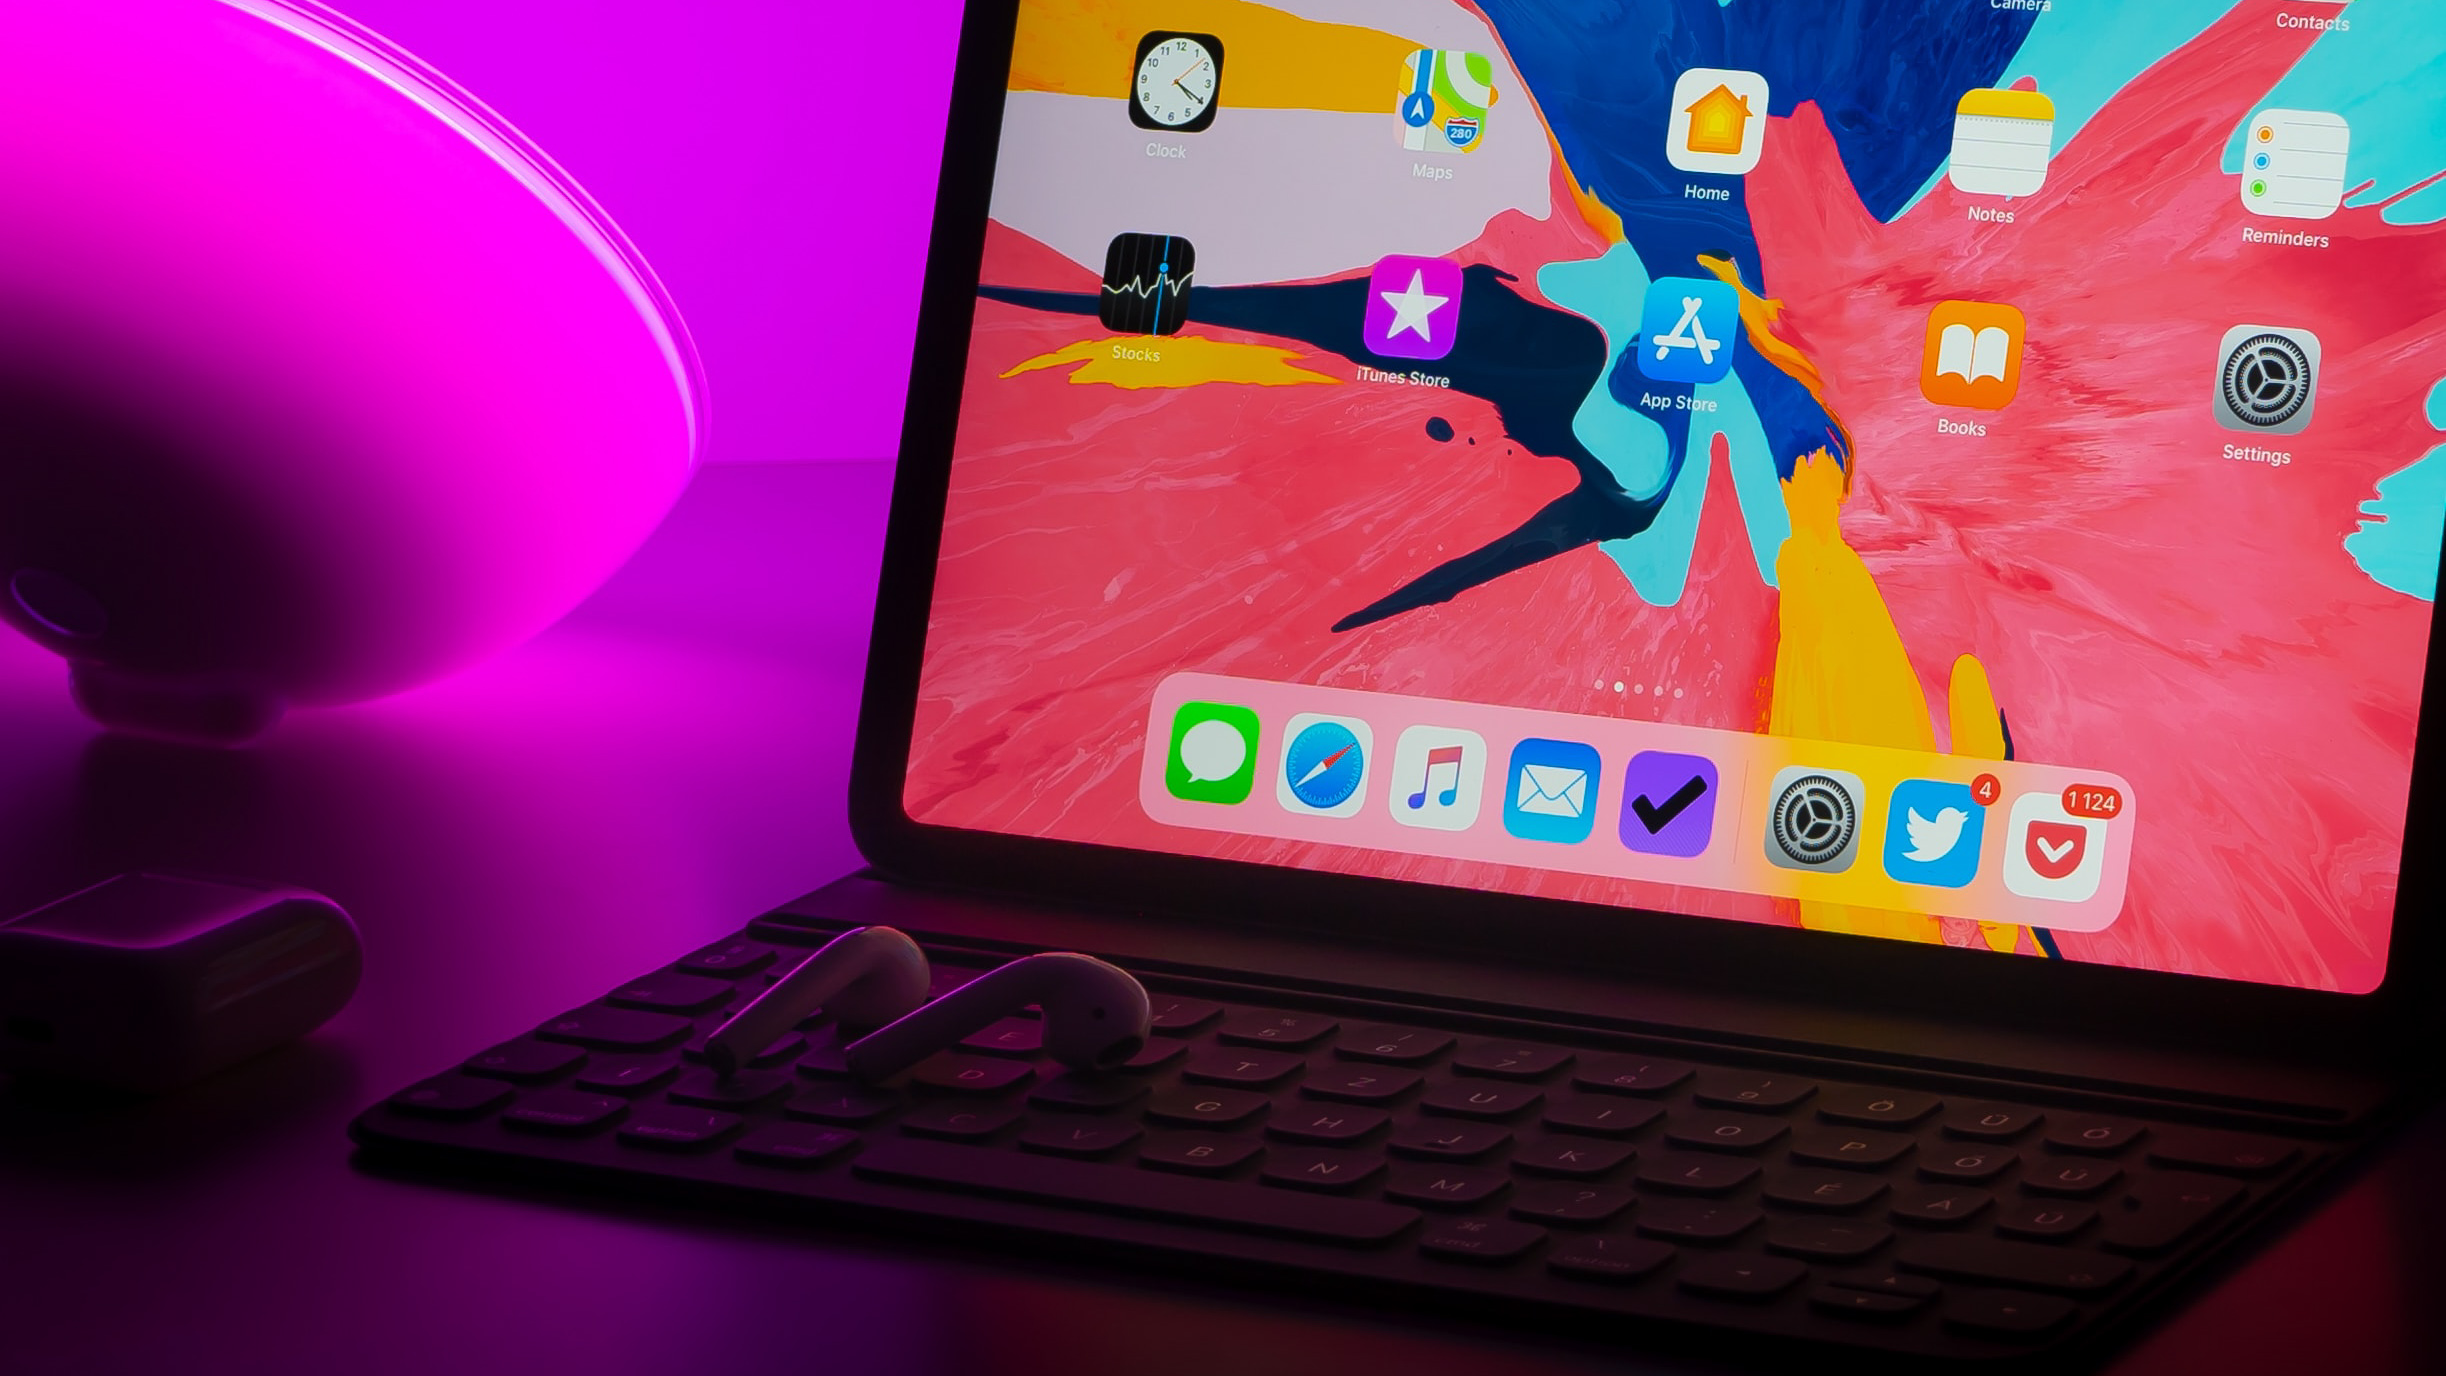 ipad pro keyboard and earbuds in pink background